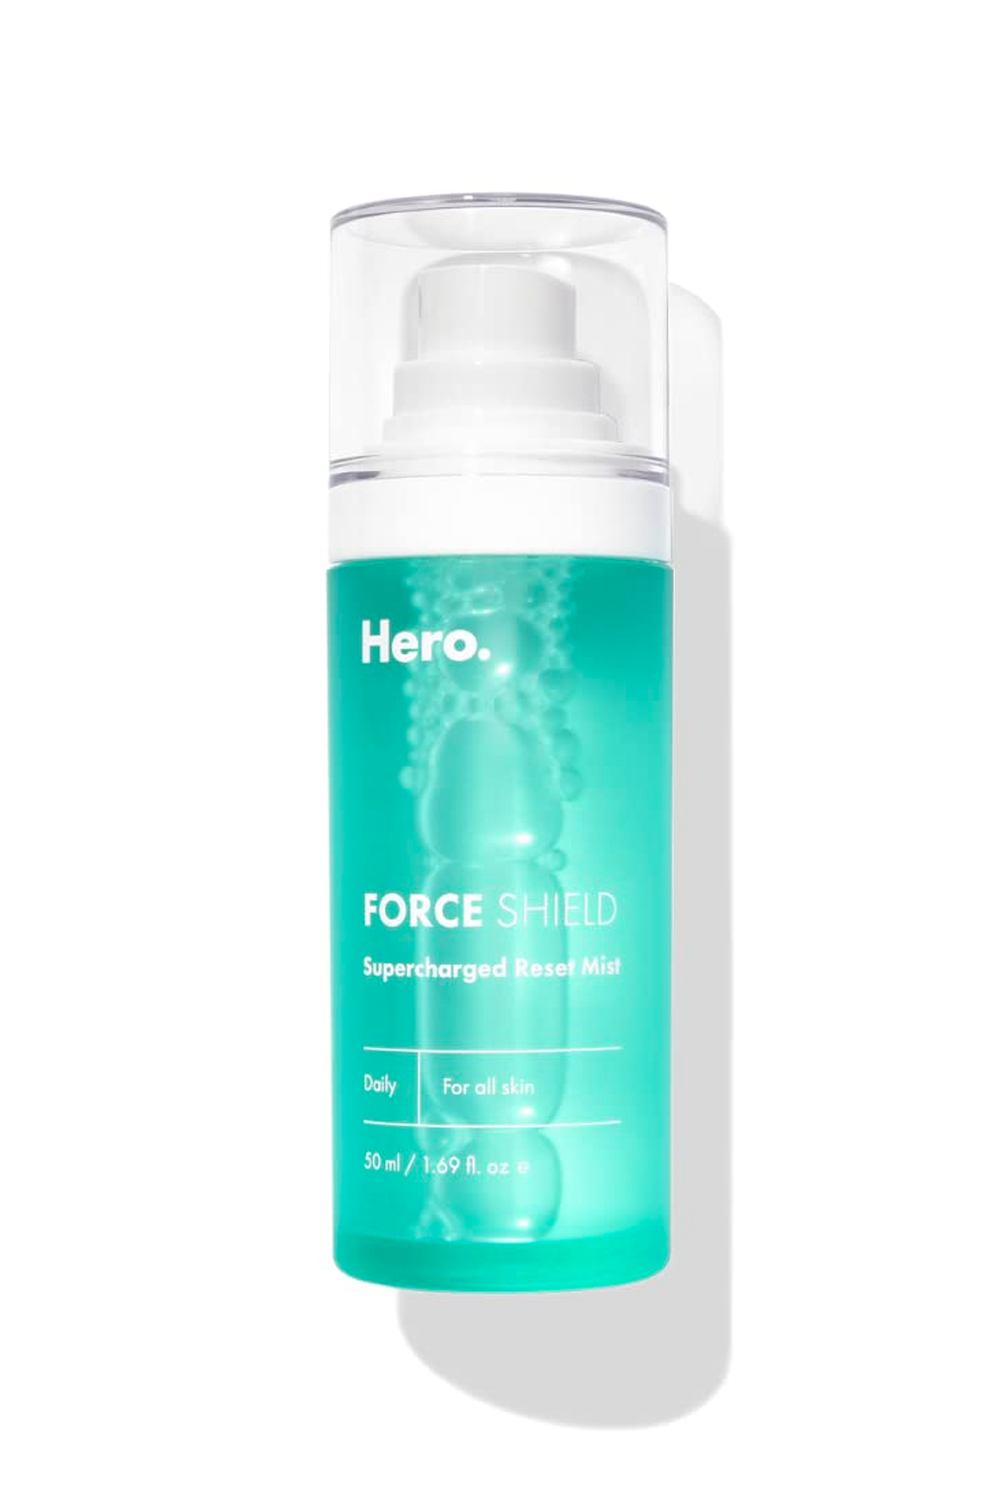 Hero Cosmetics Force Shield Supercharged Reset Mist